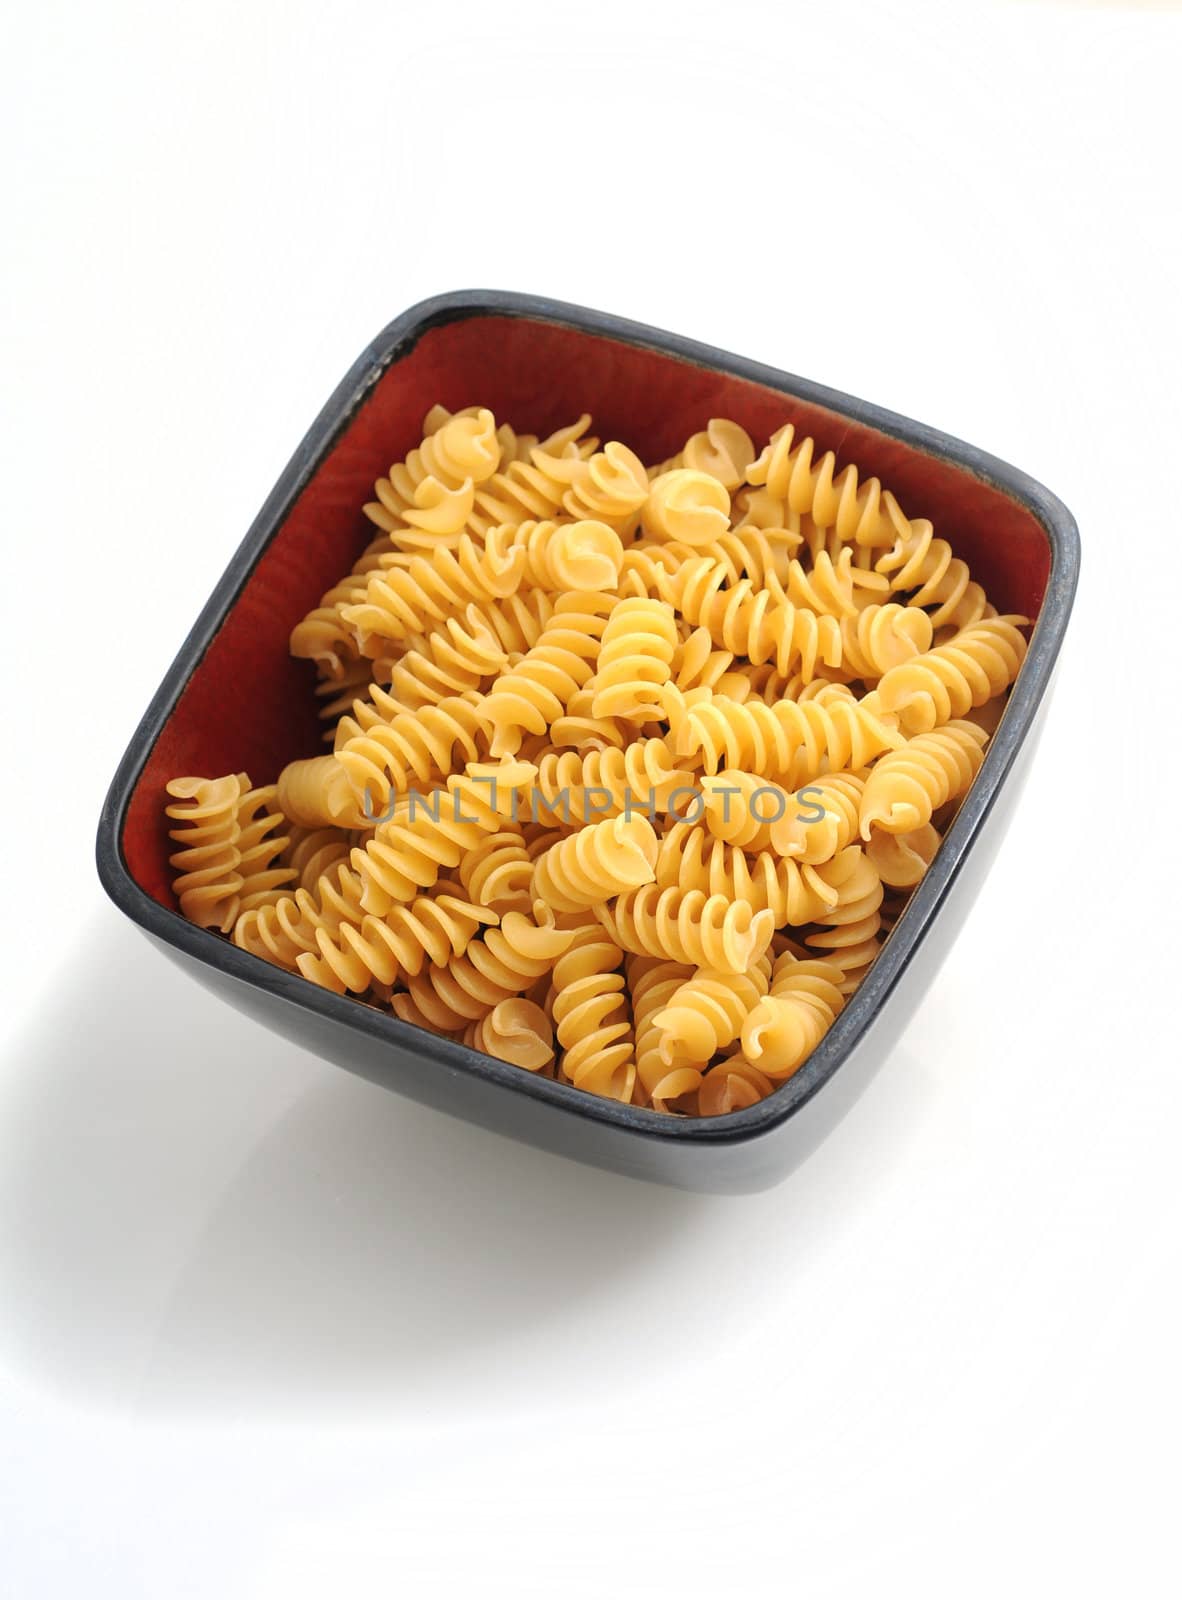 a bowl of rotellii pasta in red bowl on white background